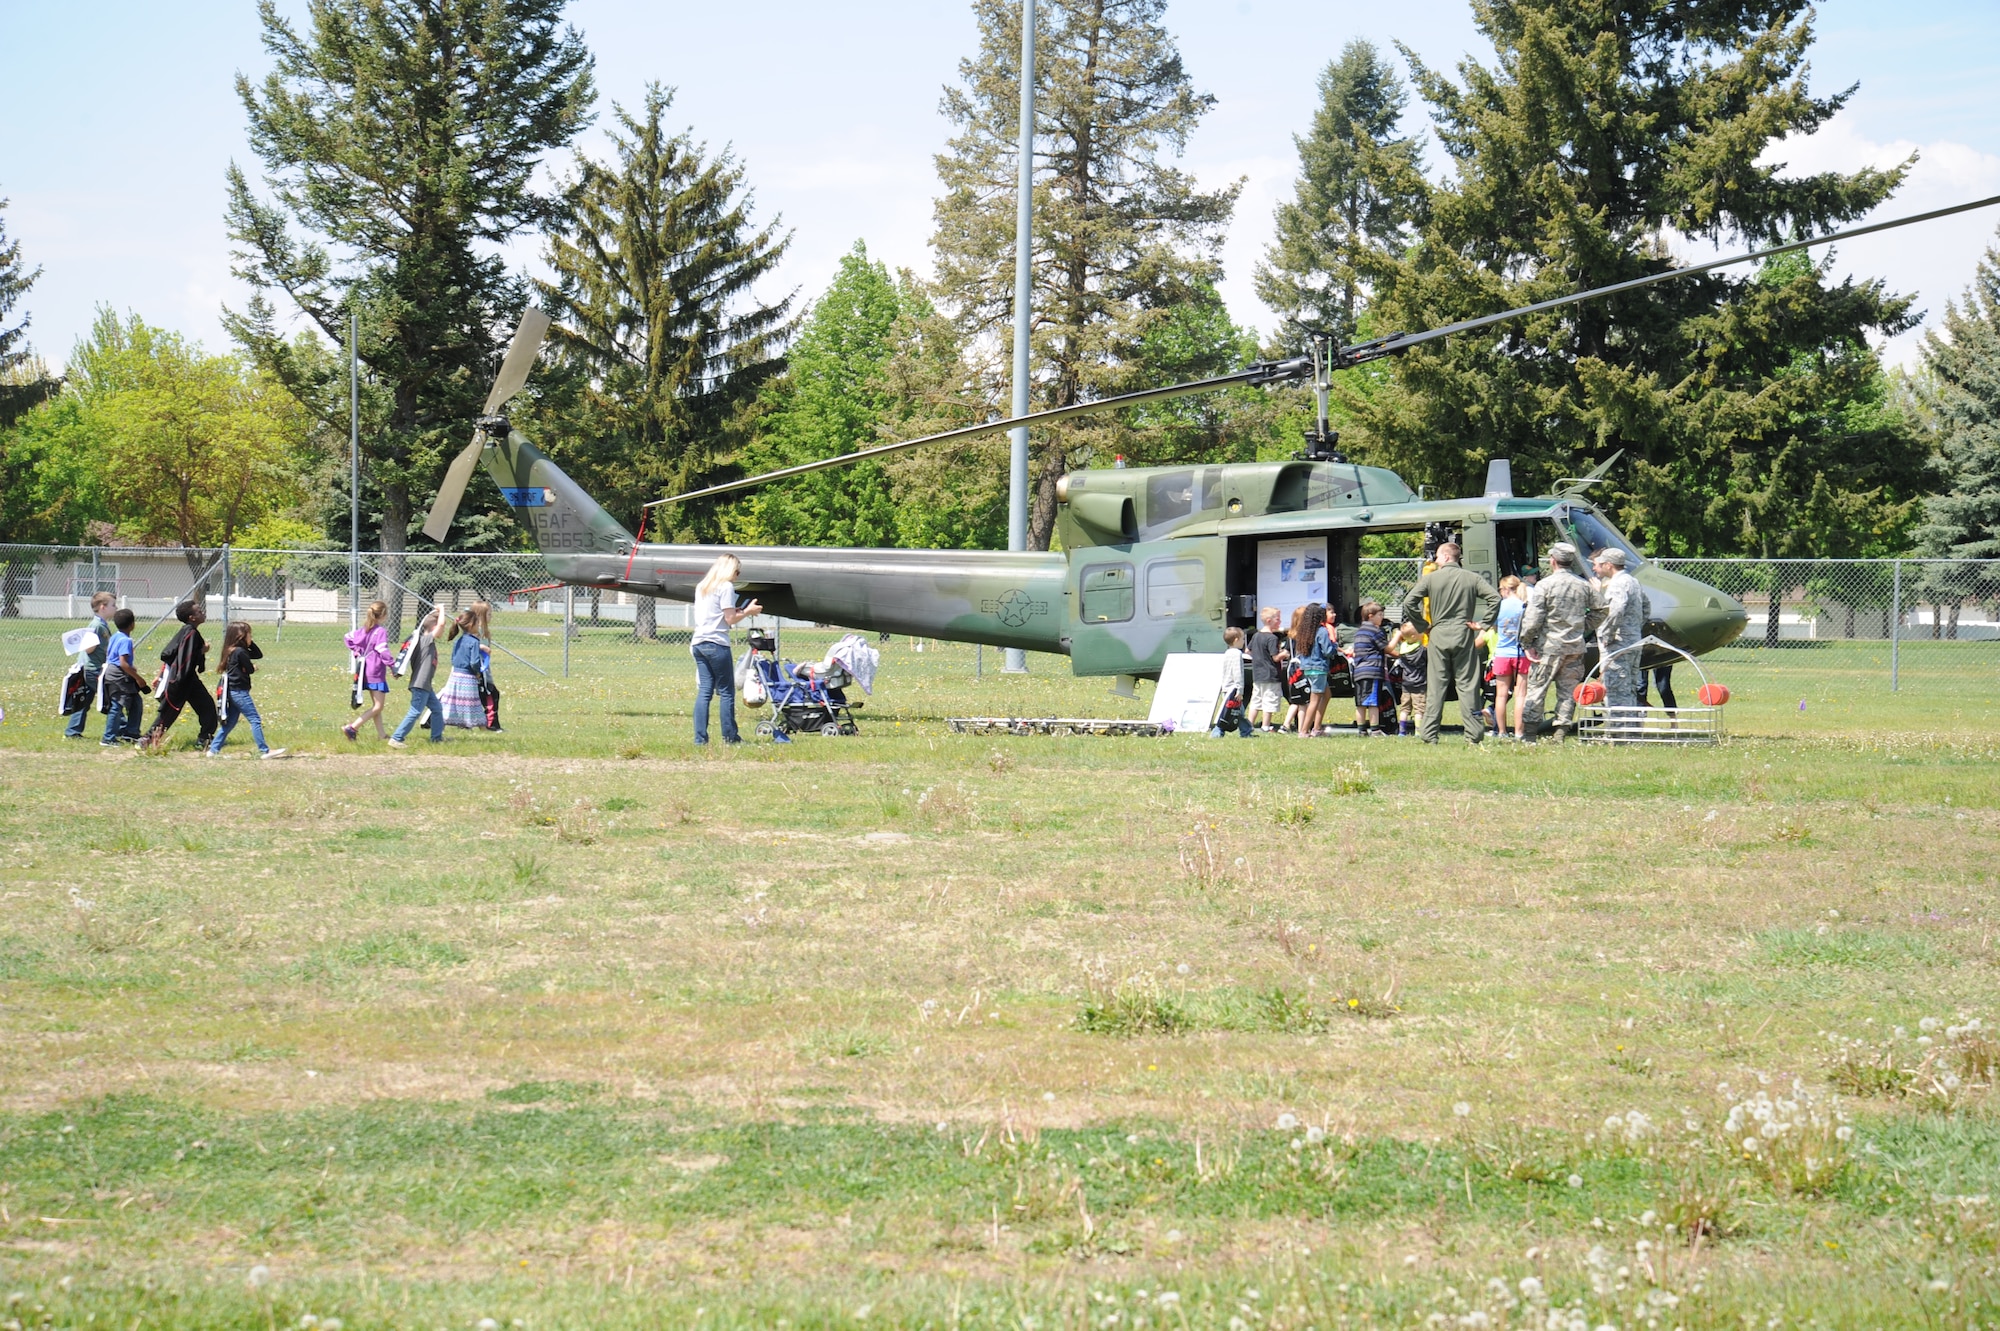 Children from Michael Anderson Elementary School inspect a UH-1N Iroquois “Huey” helicopter May 11, 2015, at Fairchild Air Force Base, Wash. Children had the opportunity to go inside the helicopter and sit in the pilot seat behind the controls. National Police Week is a collaborative effort of many organizations dedicated to honoring America's law enforcement community. (U.S. Air Force photo/Airman 1st Class Nicolo J. Daniello)